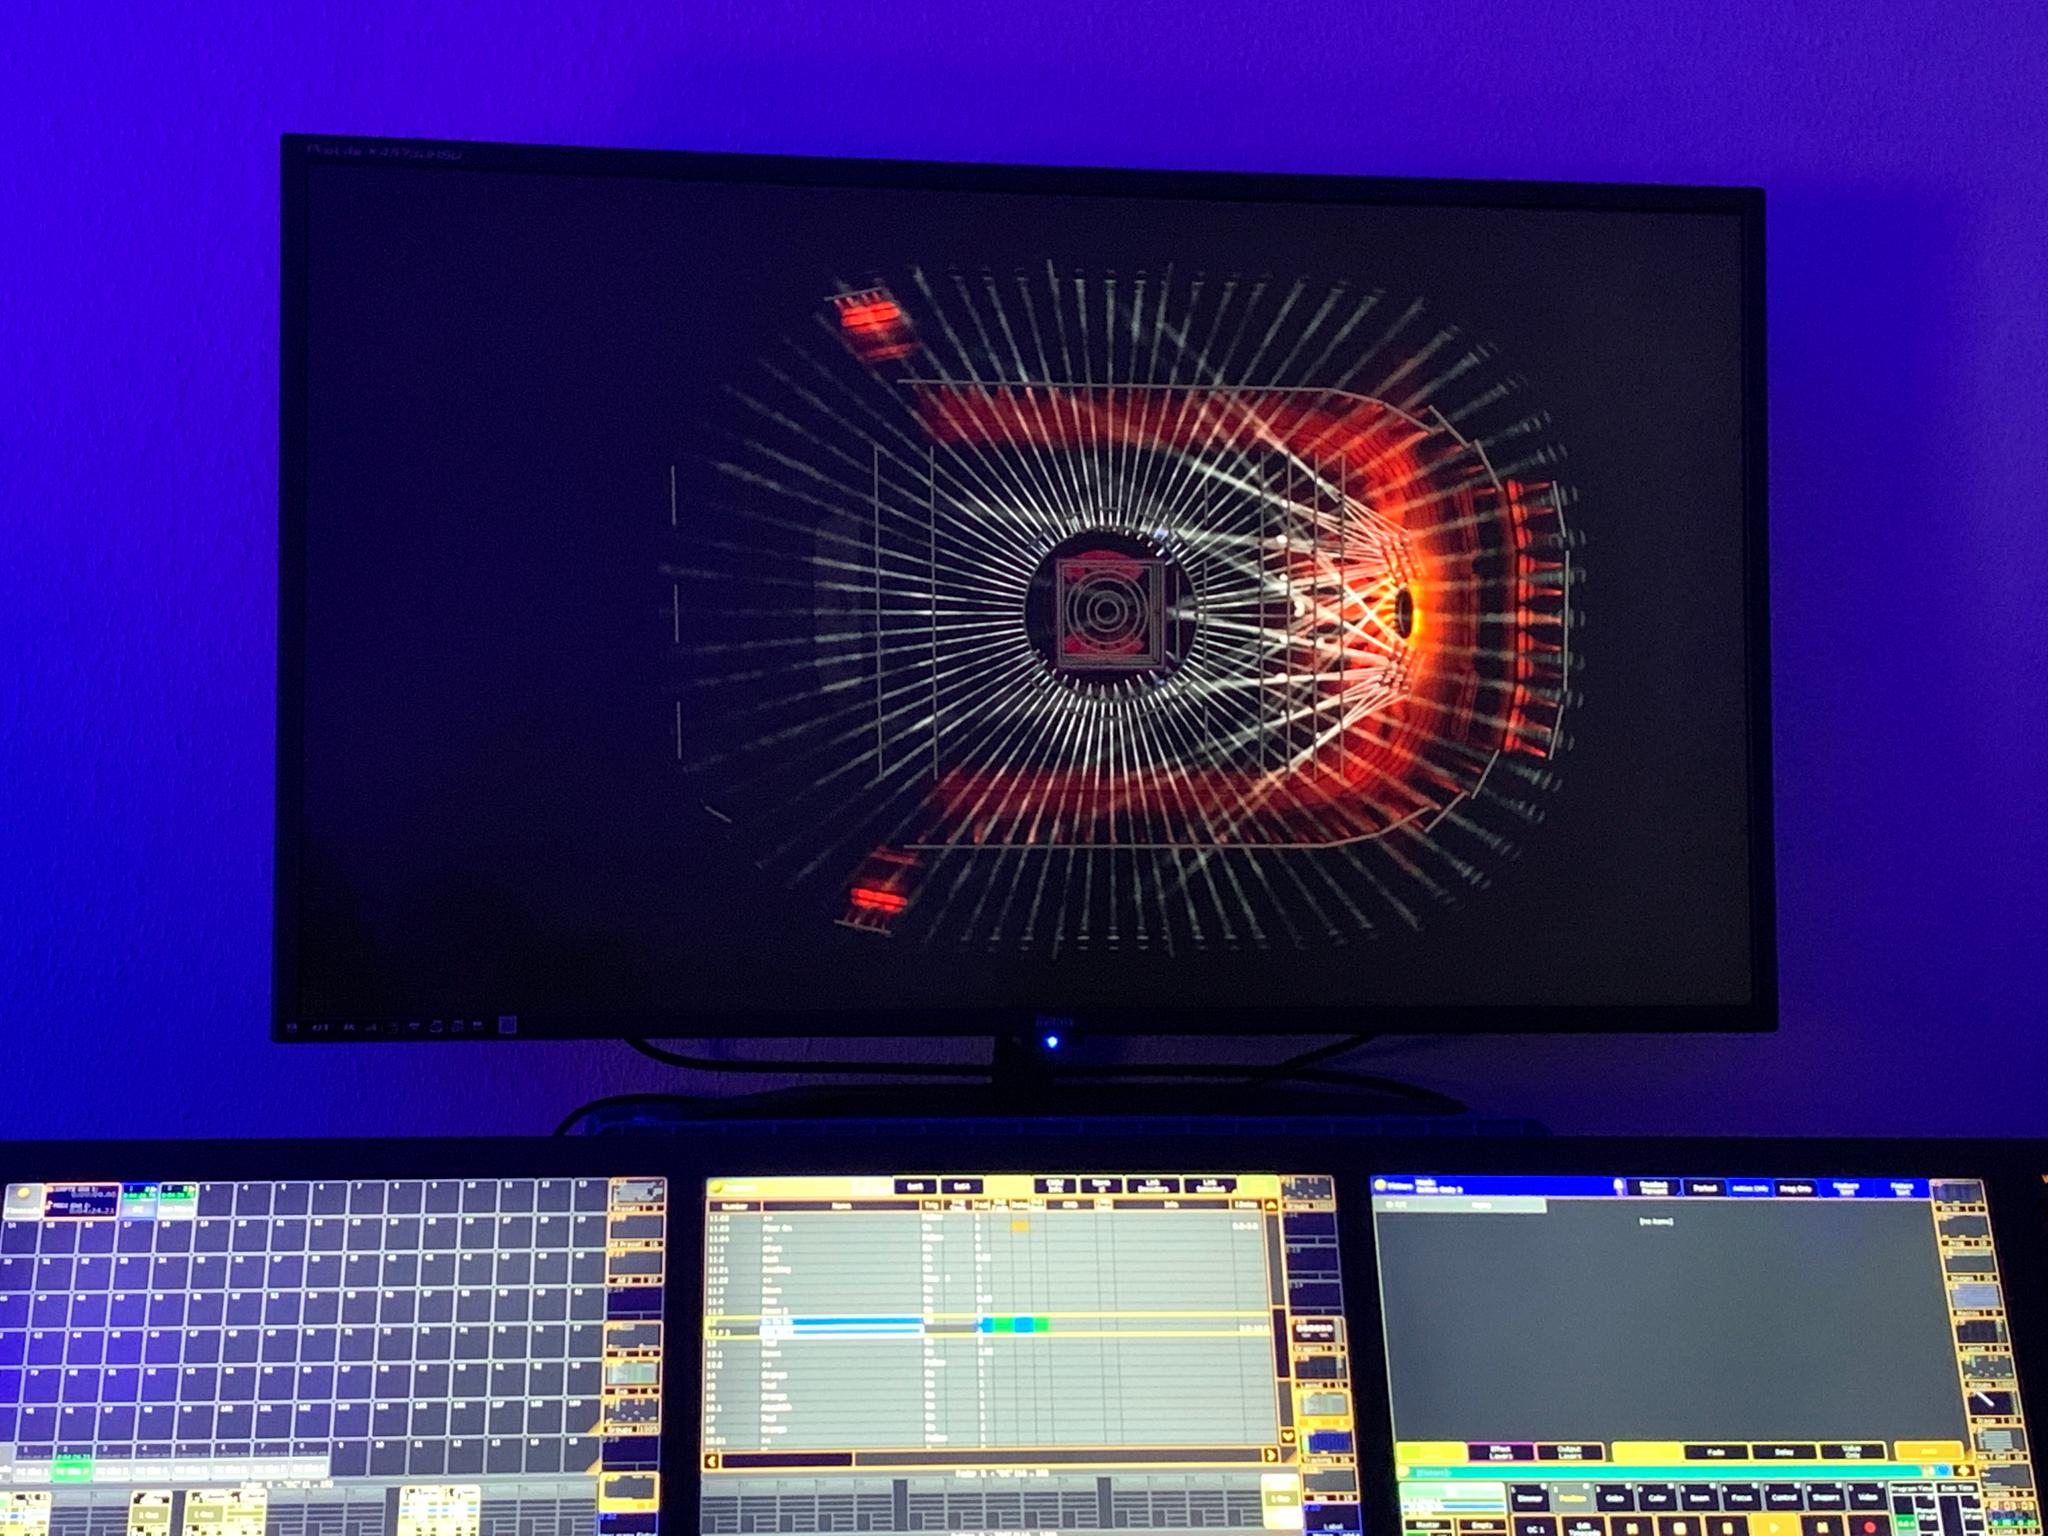 The light design as seen from a monitor in a tech room.